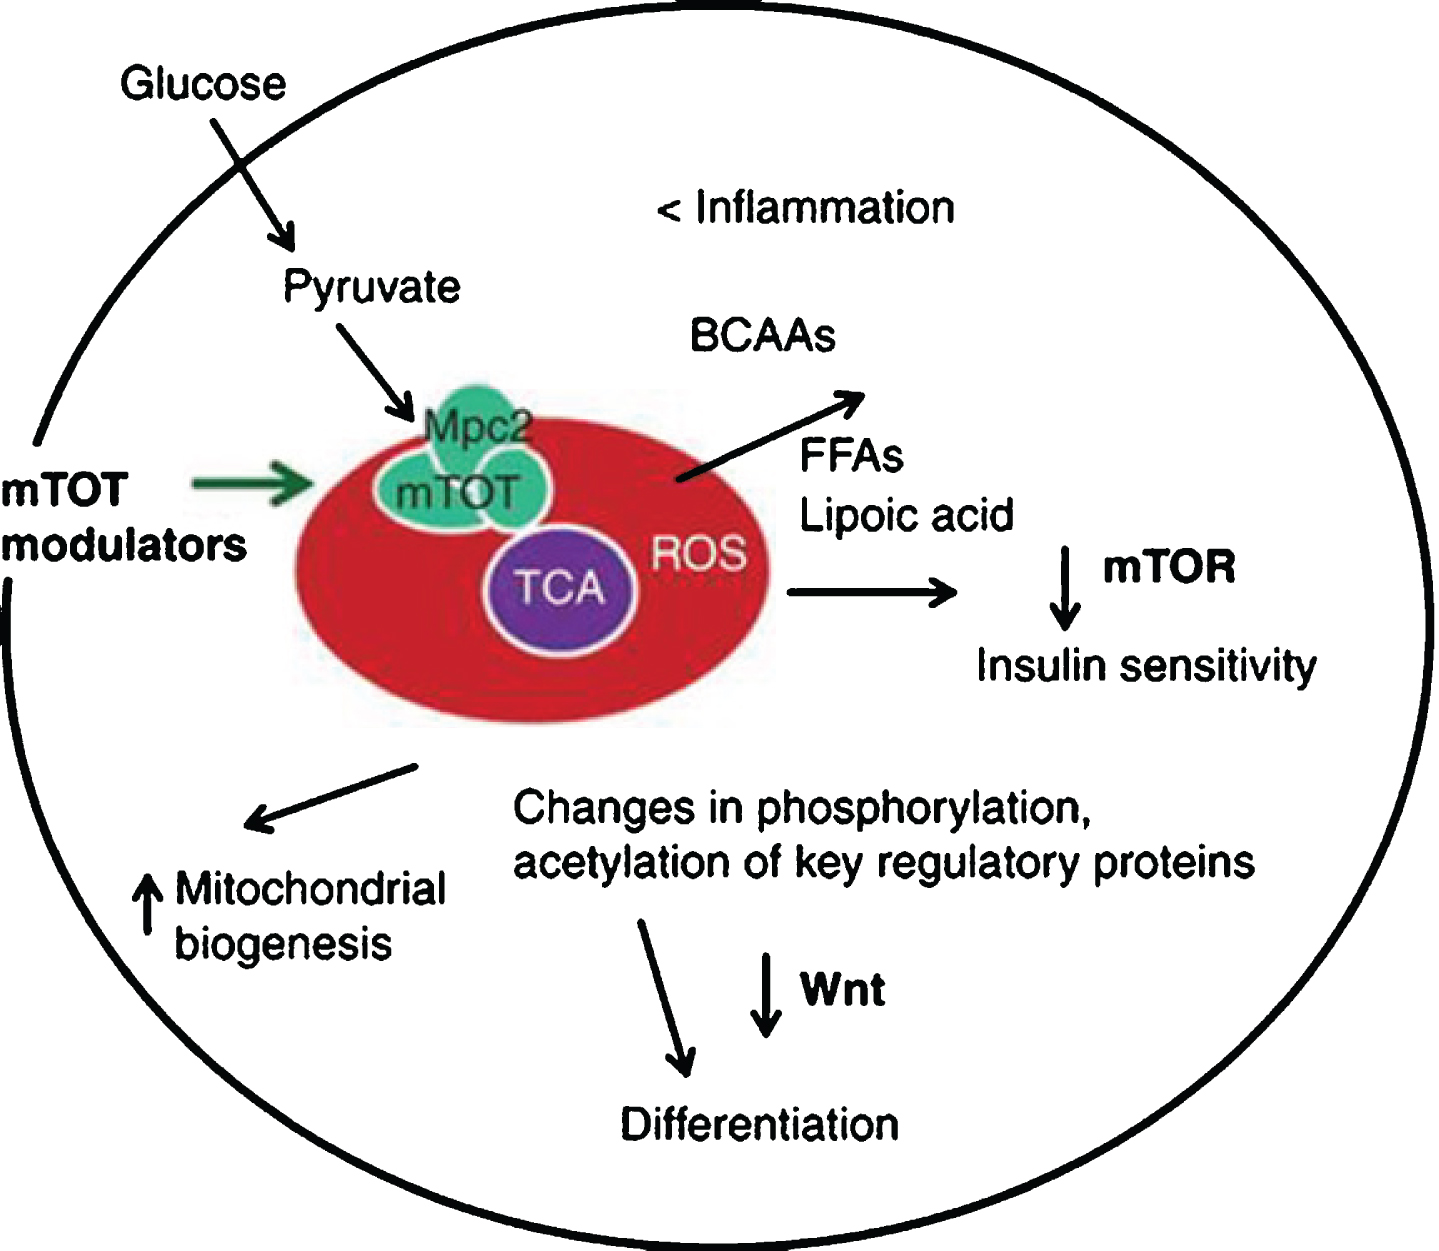 Targeting mTOT to affect mitochondrial activity and proliferation. Source: Metabolic Solutions Development Company.